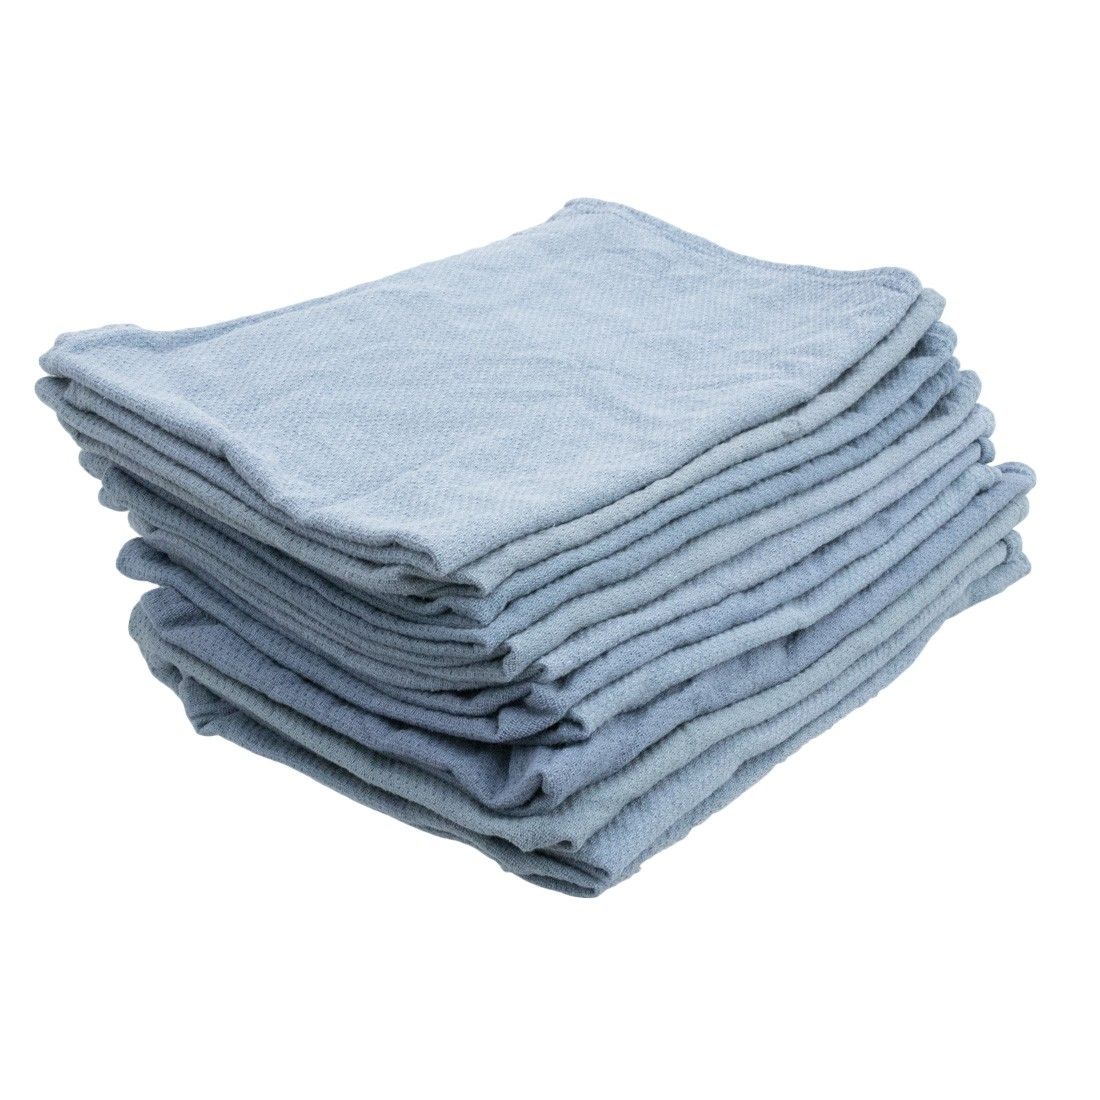 Ultra Premium Recycled Surgical Towels - Jumbo - 12 Pack - Stacked View